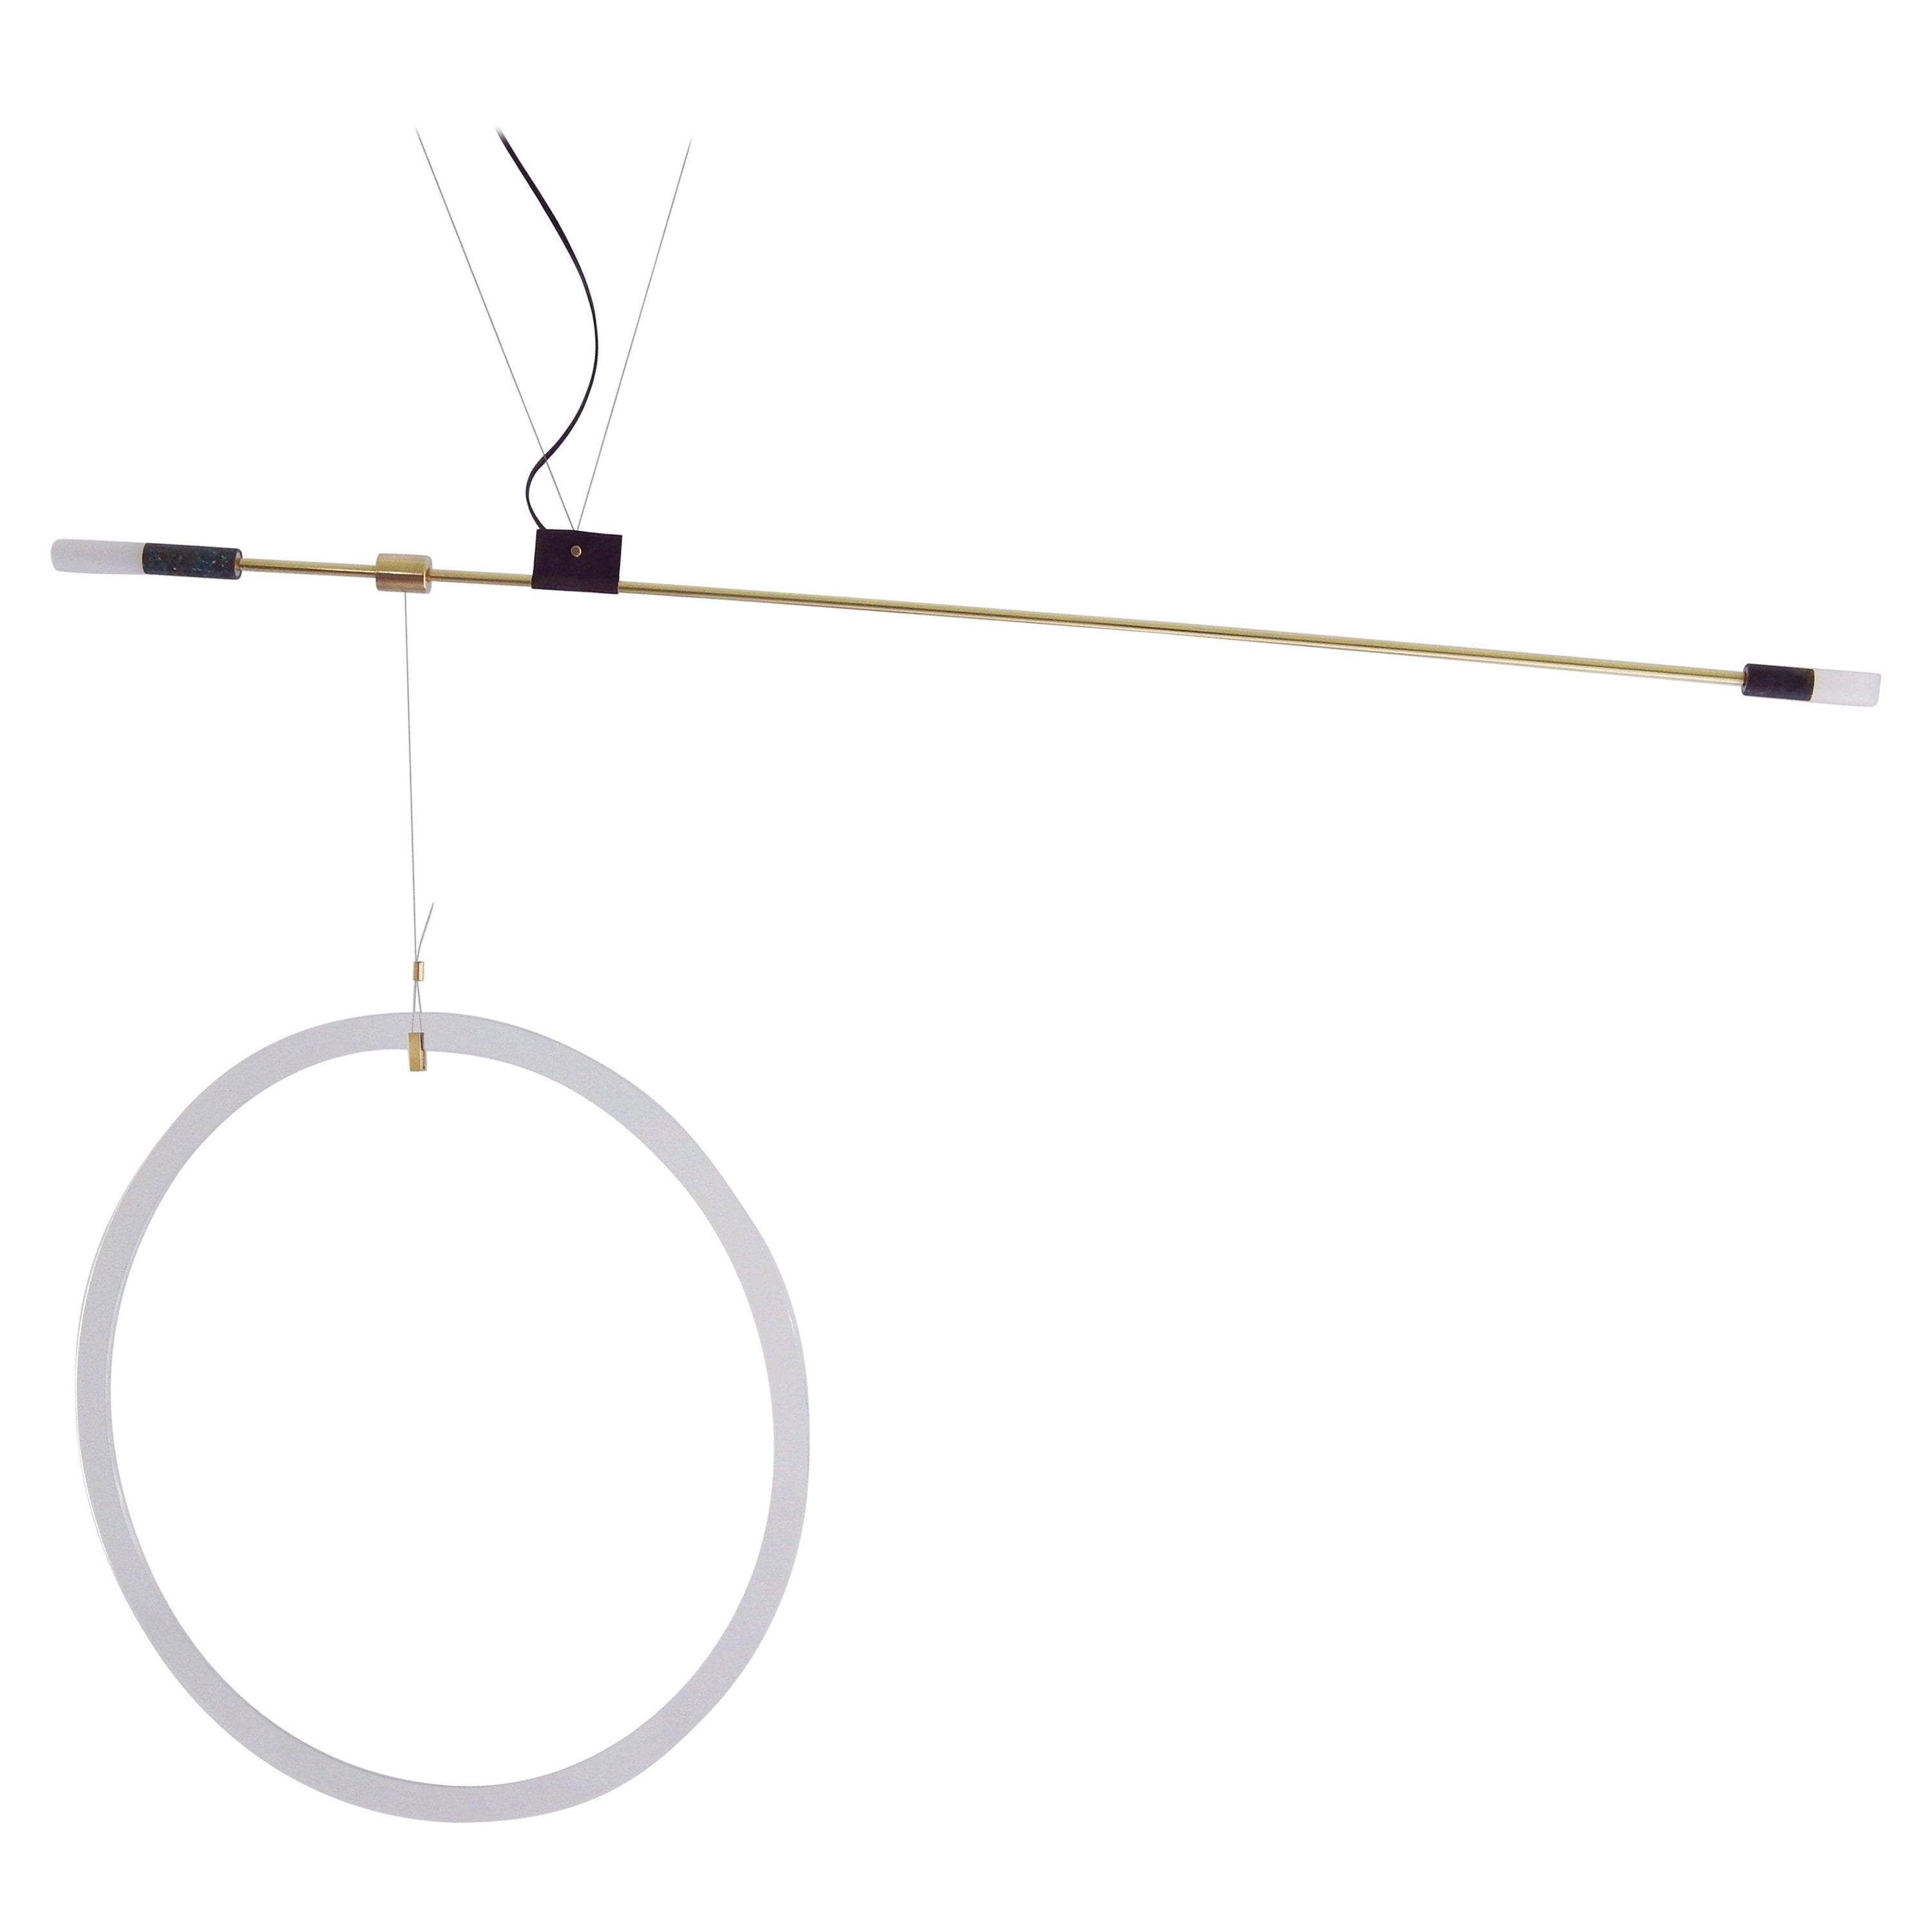 Opus iii Pendant Lamp by Periclis Frementitis For Sale